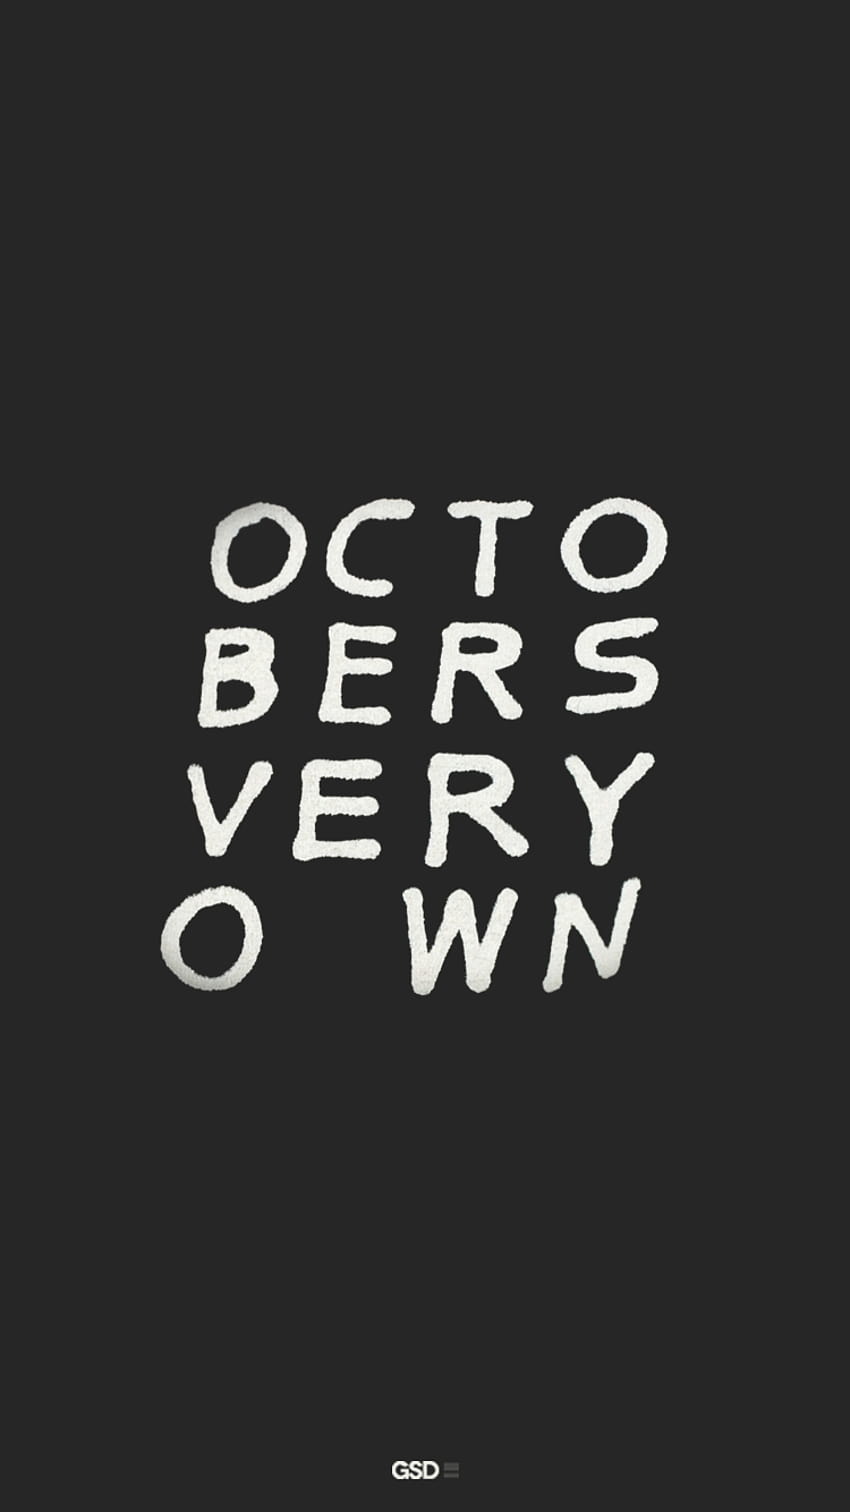 Wall typography drake owls october banner ovoxo octobers very own HD  wallpaper  Pxfuel